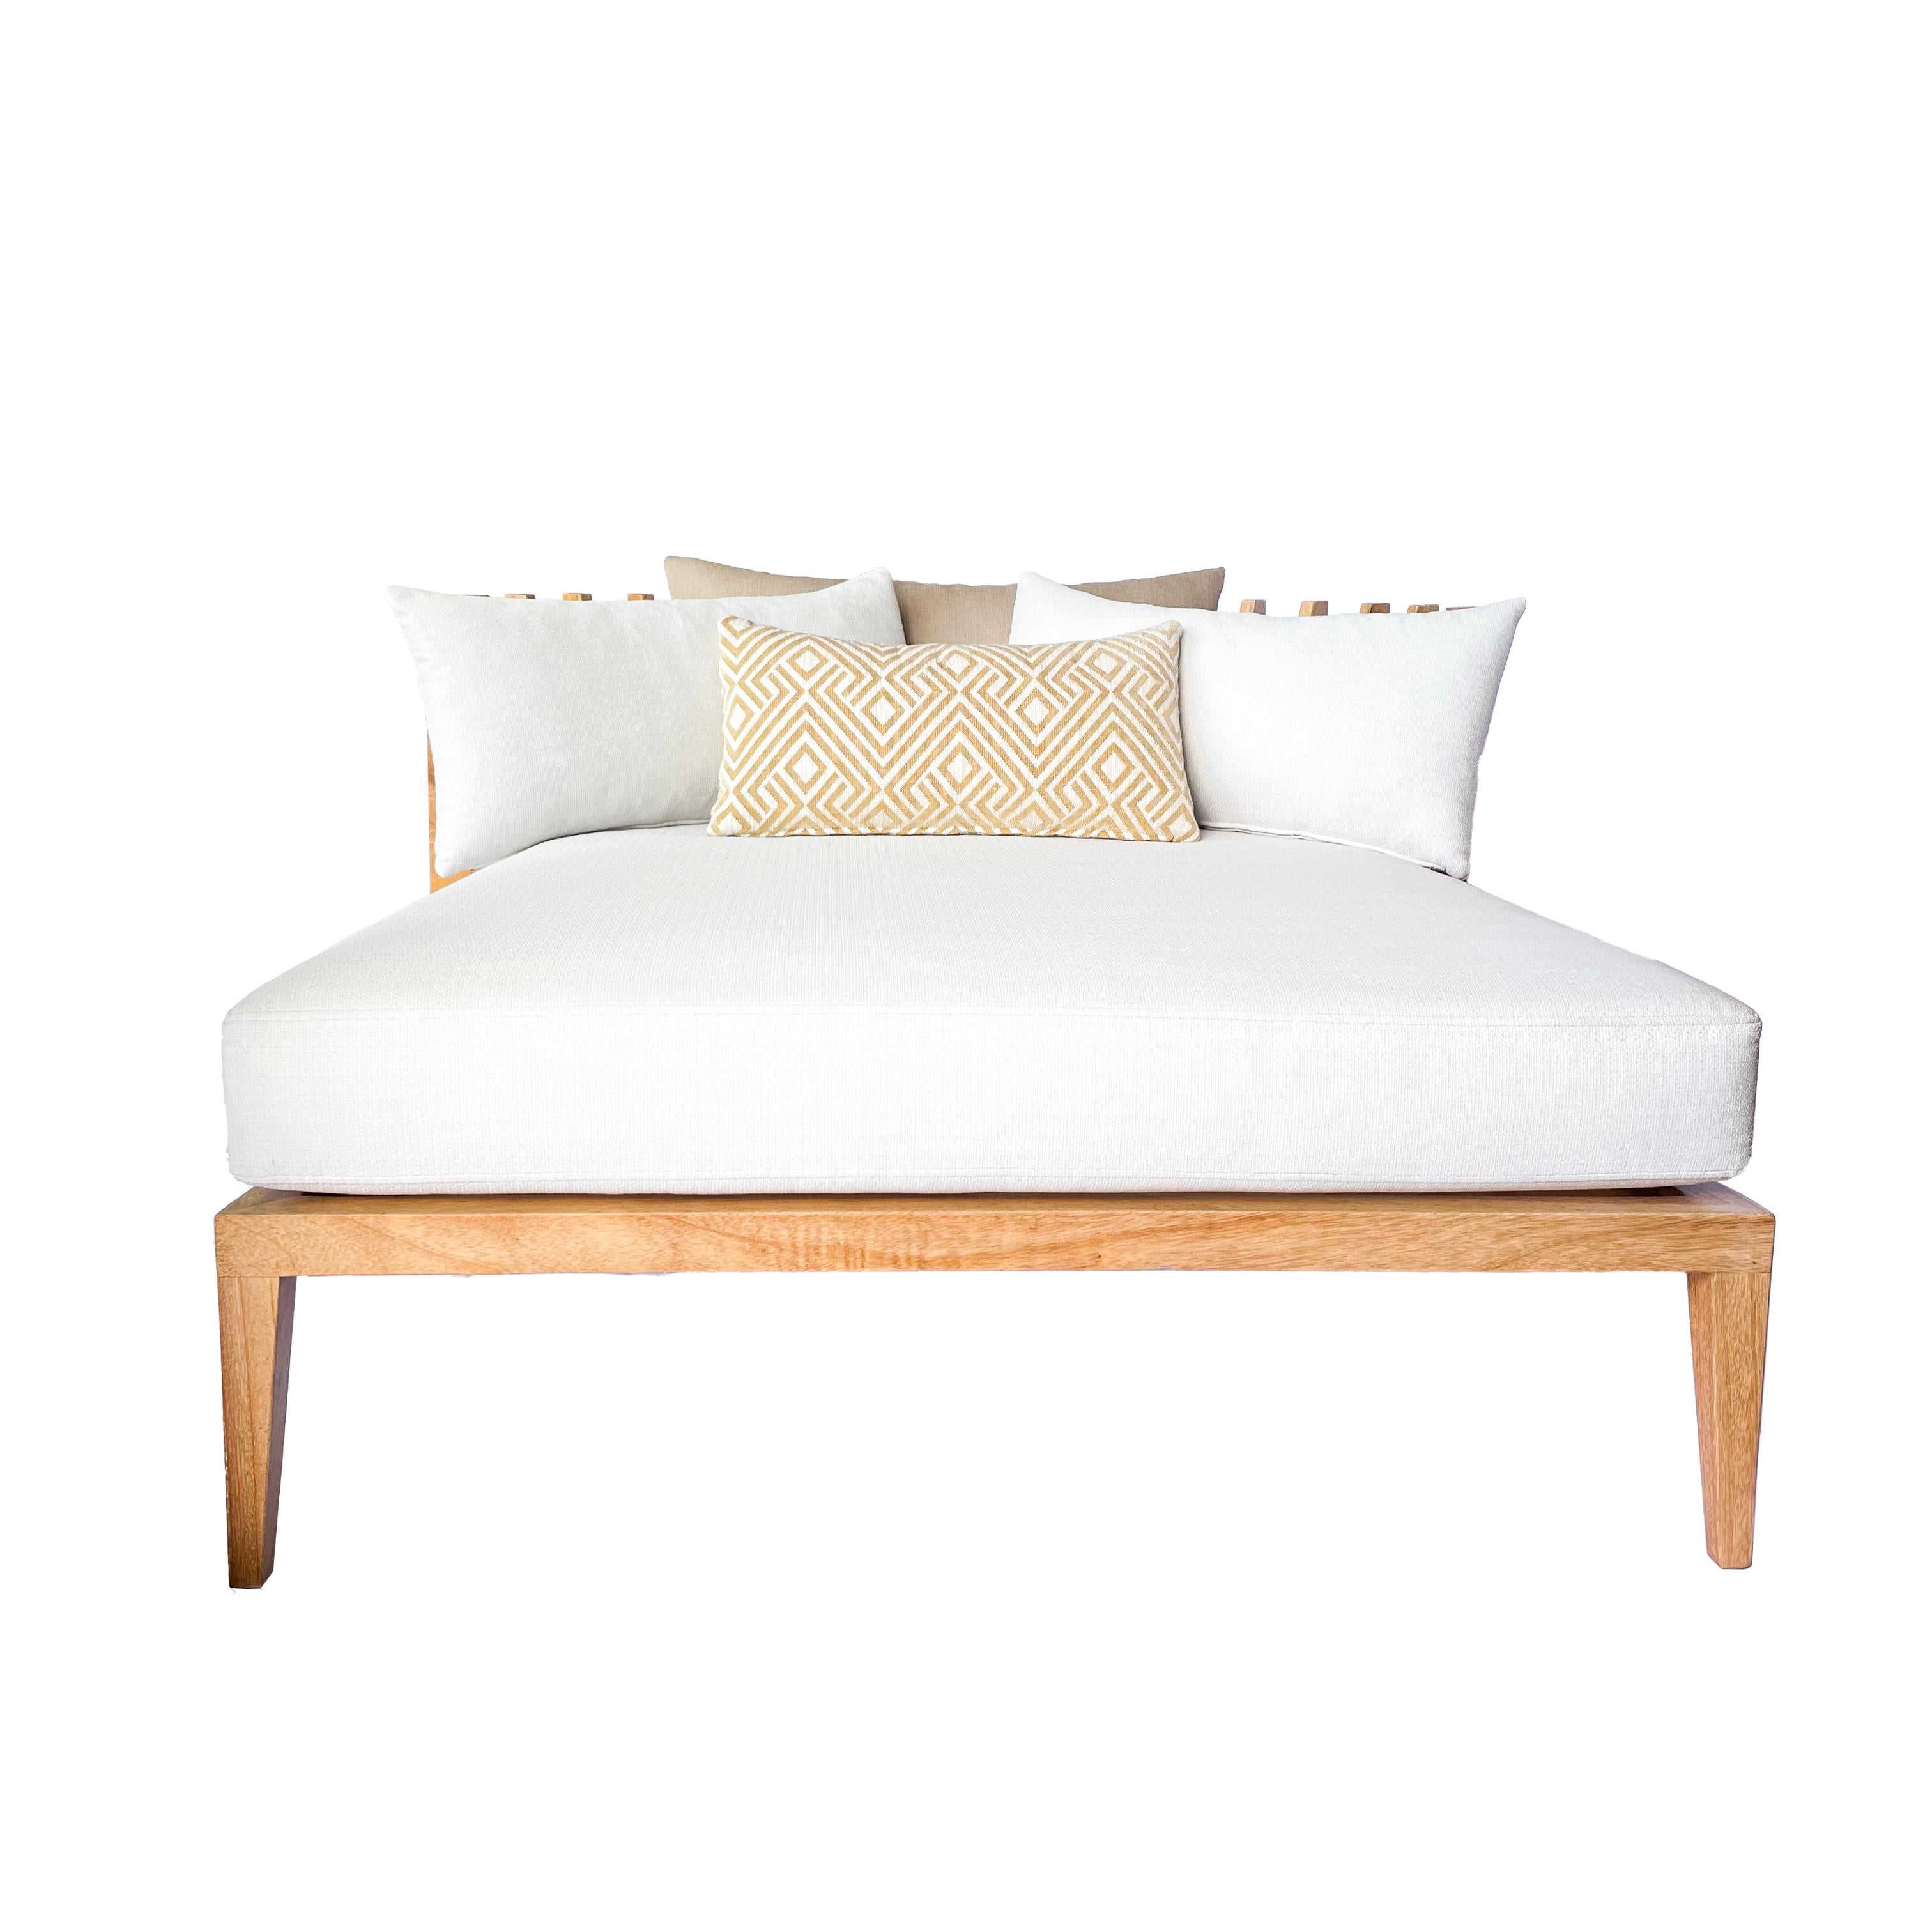 Contemporary Modern Wood Day Bed by Pierre Sarkis For Sale